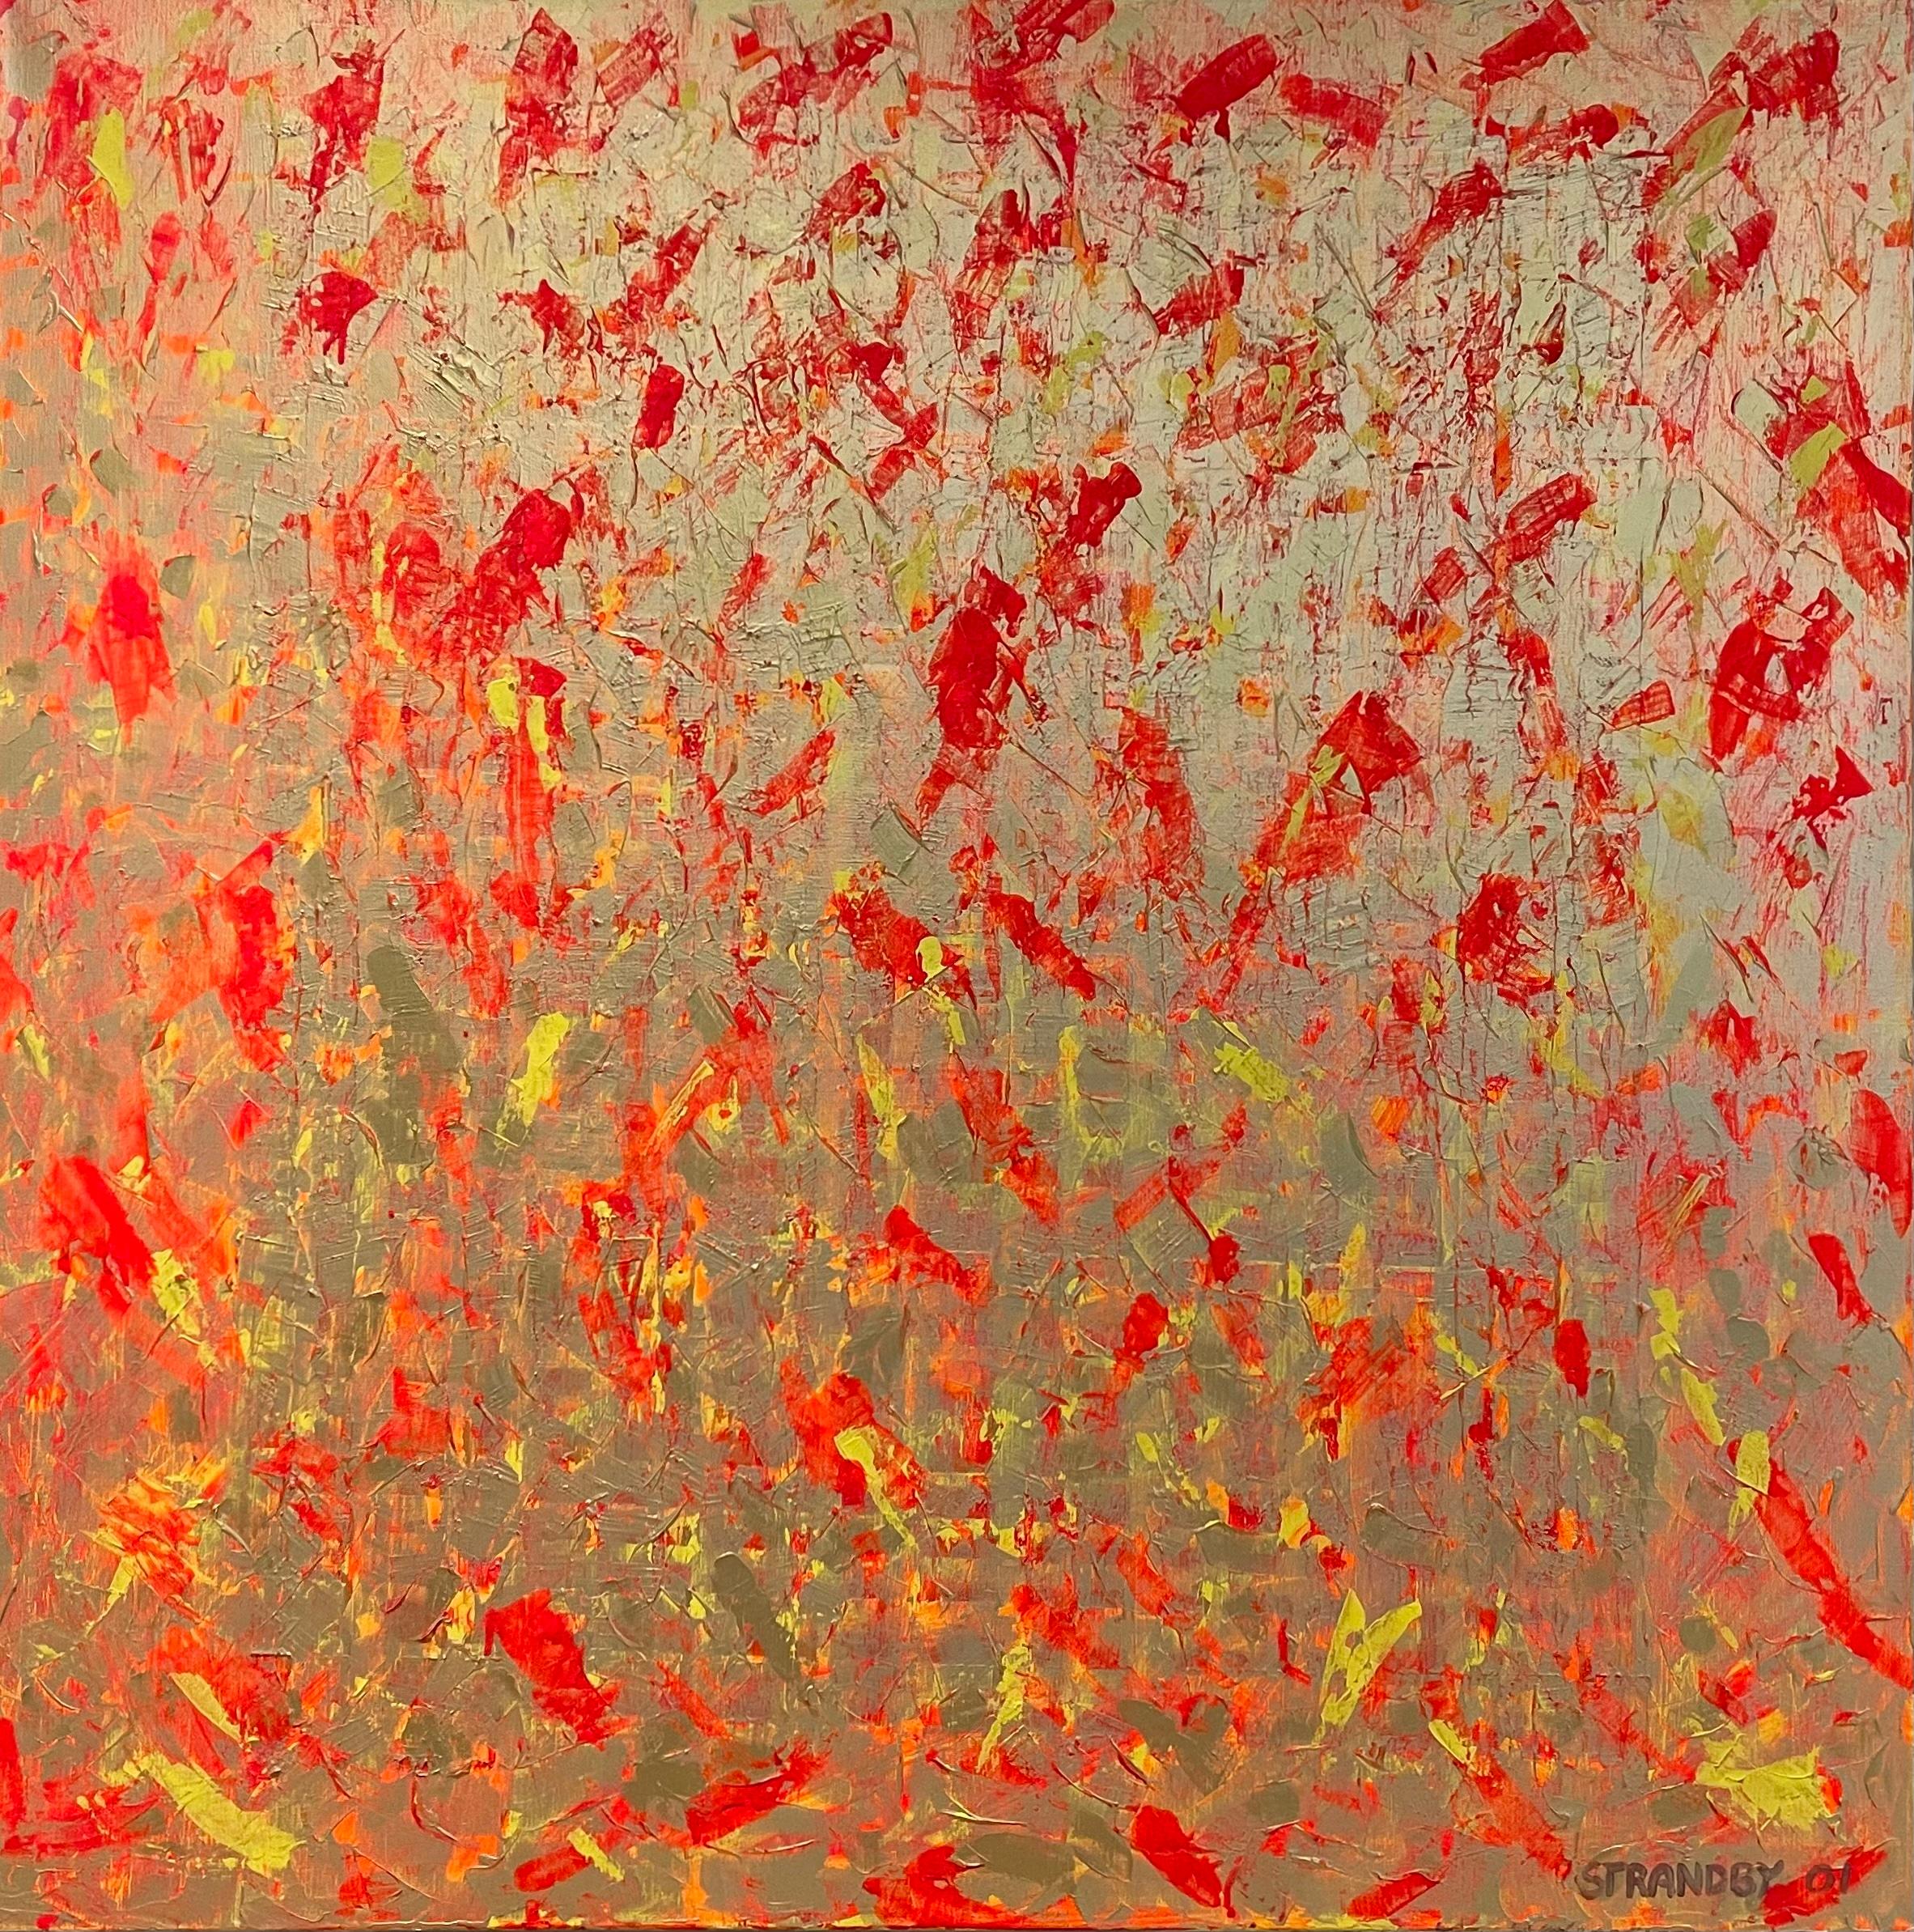 Presenting a large gold, orange, and yellow contemporary abstract painting by Danish (Scandinavian) artist Kenneth Strandby (1960 - ). With its color and its large size the painting has a warm and alluring visual effect. 

Originally the painting is